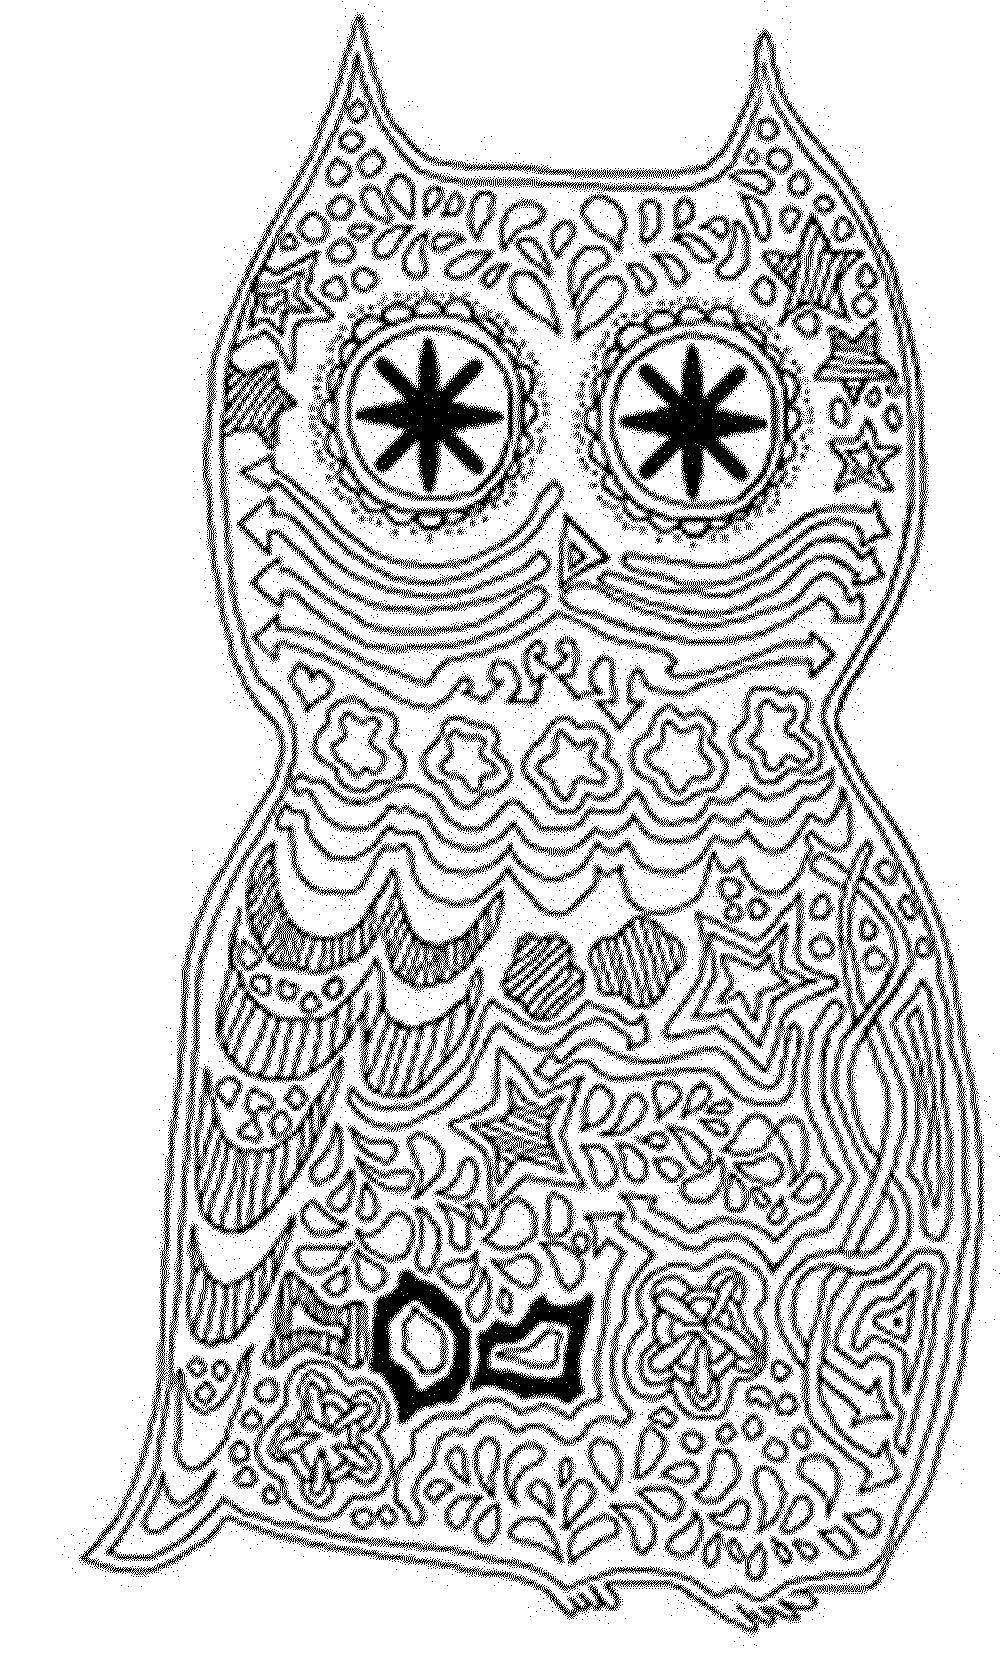 Coloring Patterned owl. Category pattern . Tags:  Patterns, ethnic.